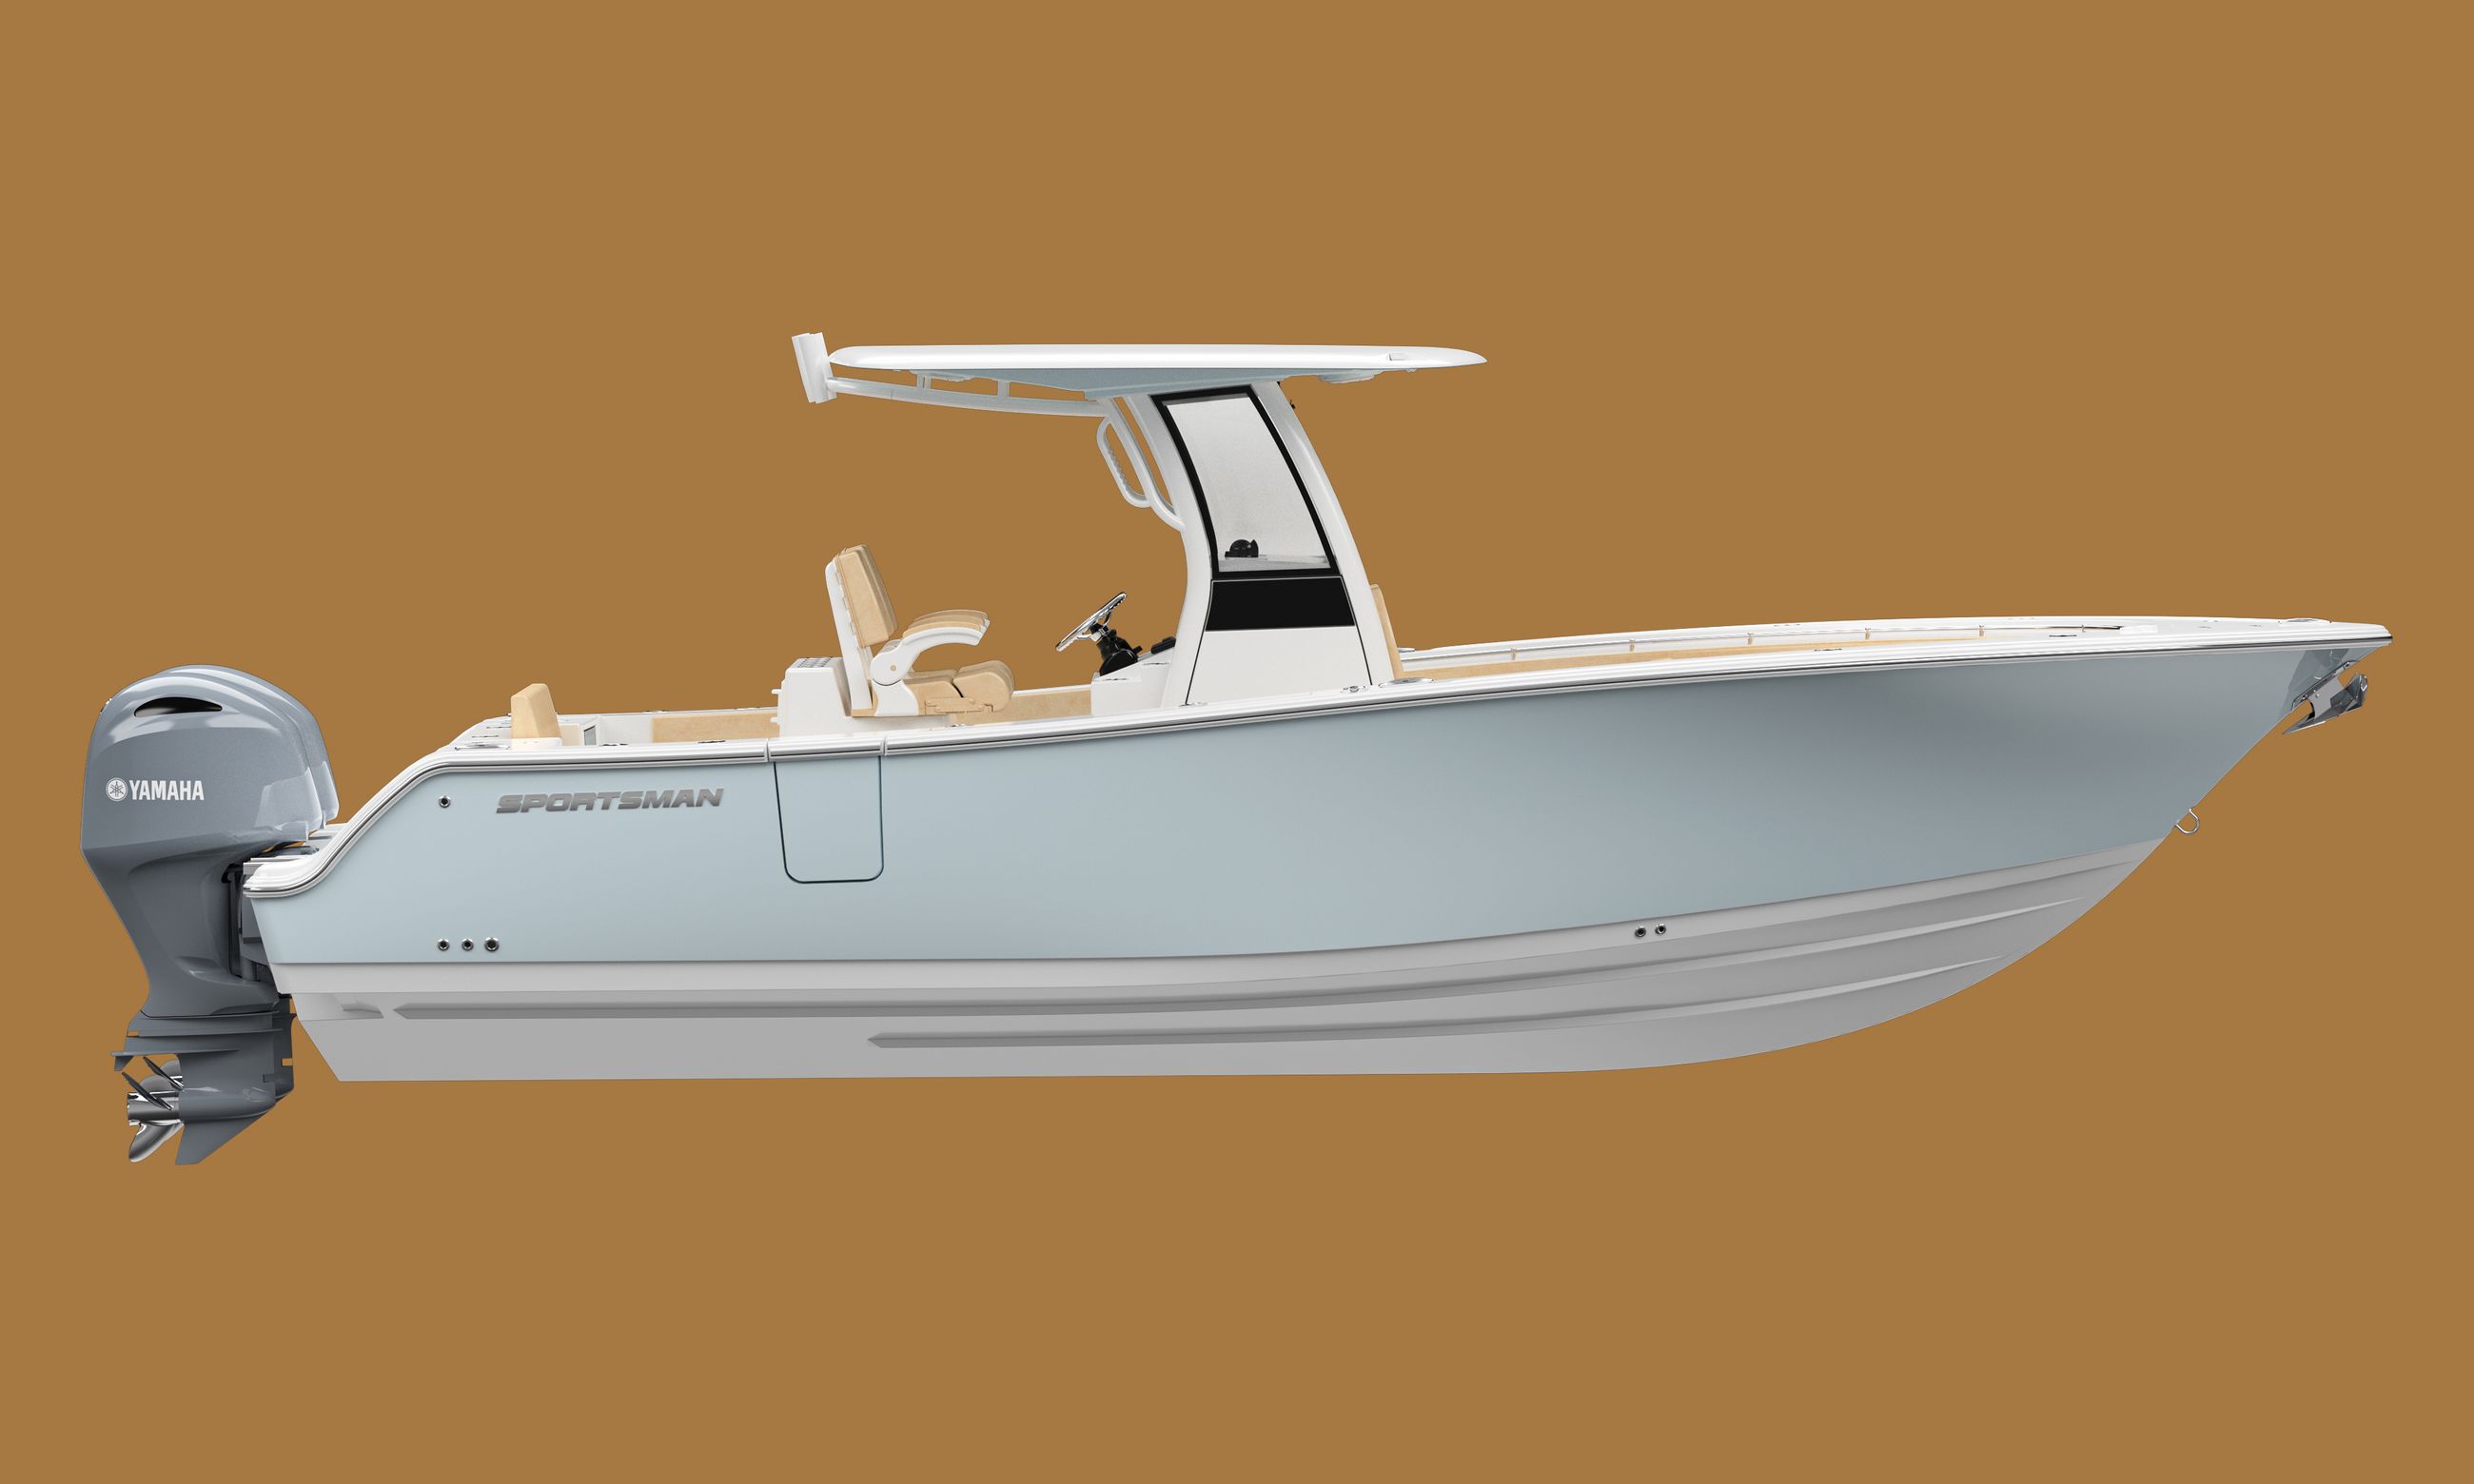 Available options for the 262-center-console